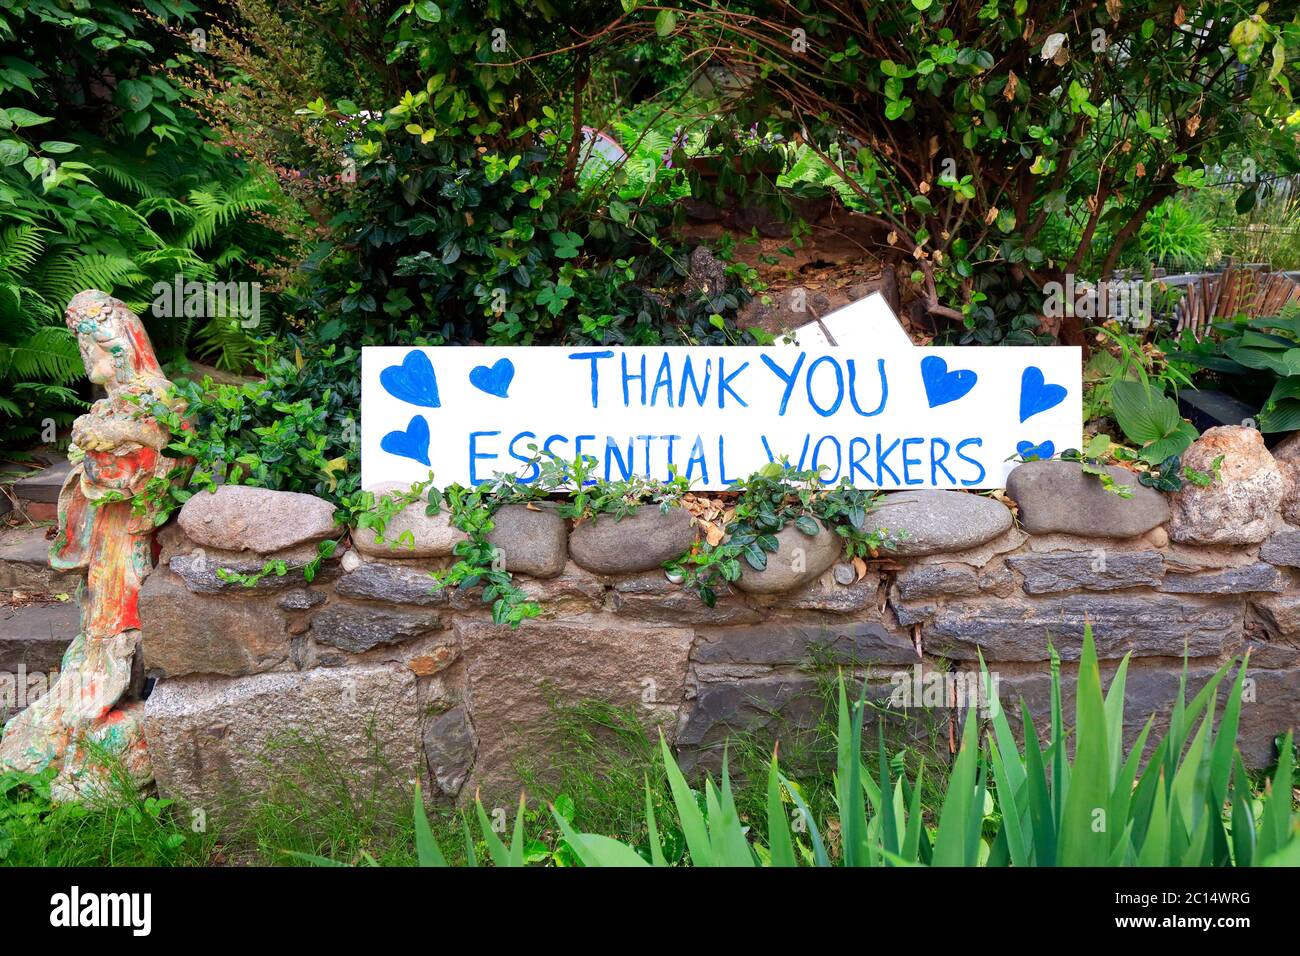 A 'Thank You Essential Workers' sign at 6B community garden in the East Village neighborhood of Manhattan, New York. June 7, 2020. Stock Photo